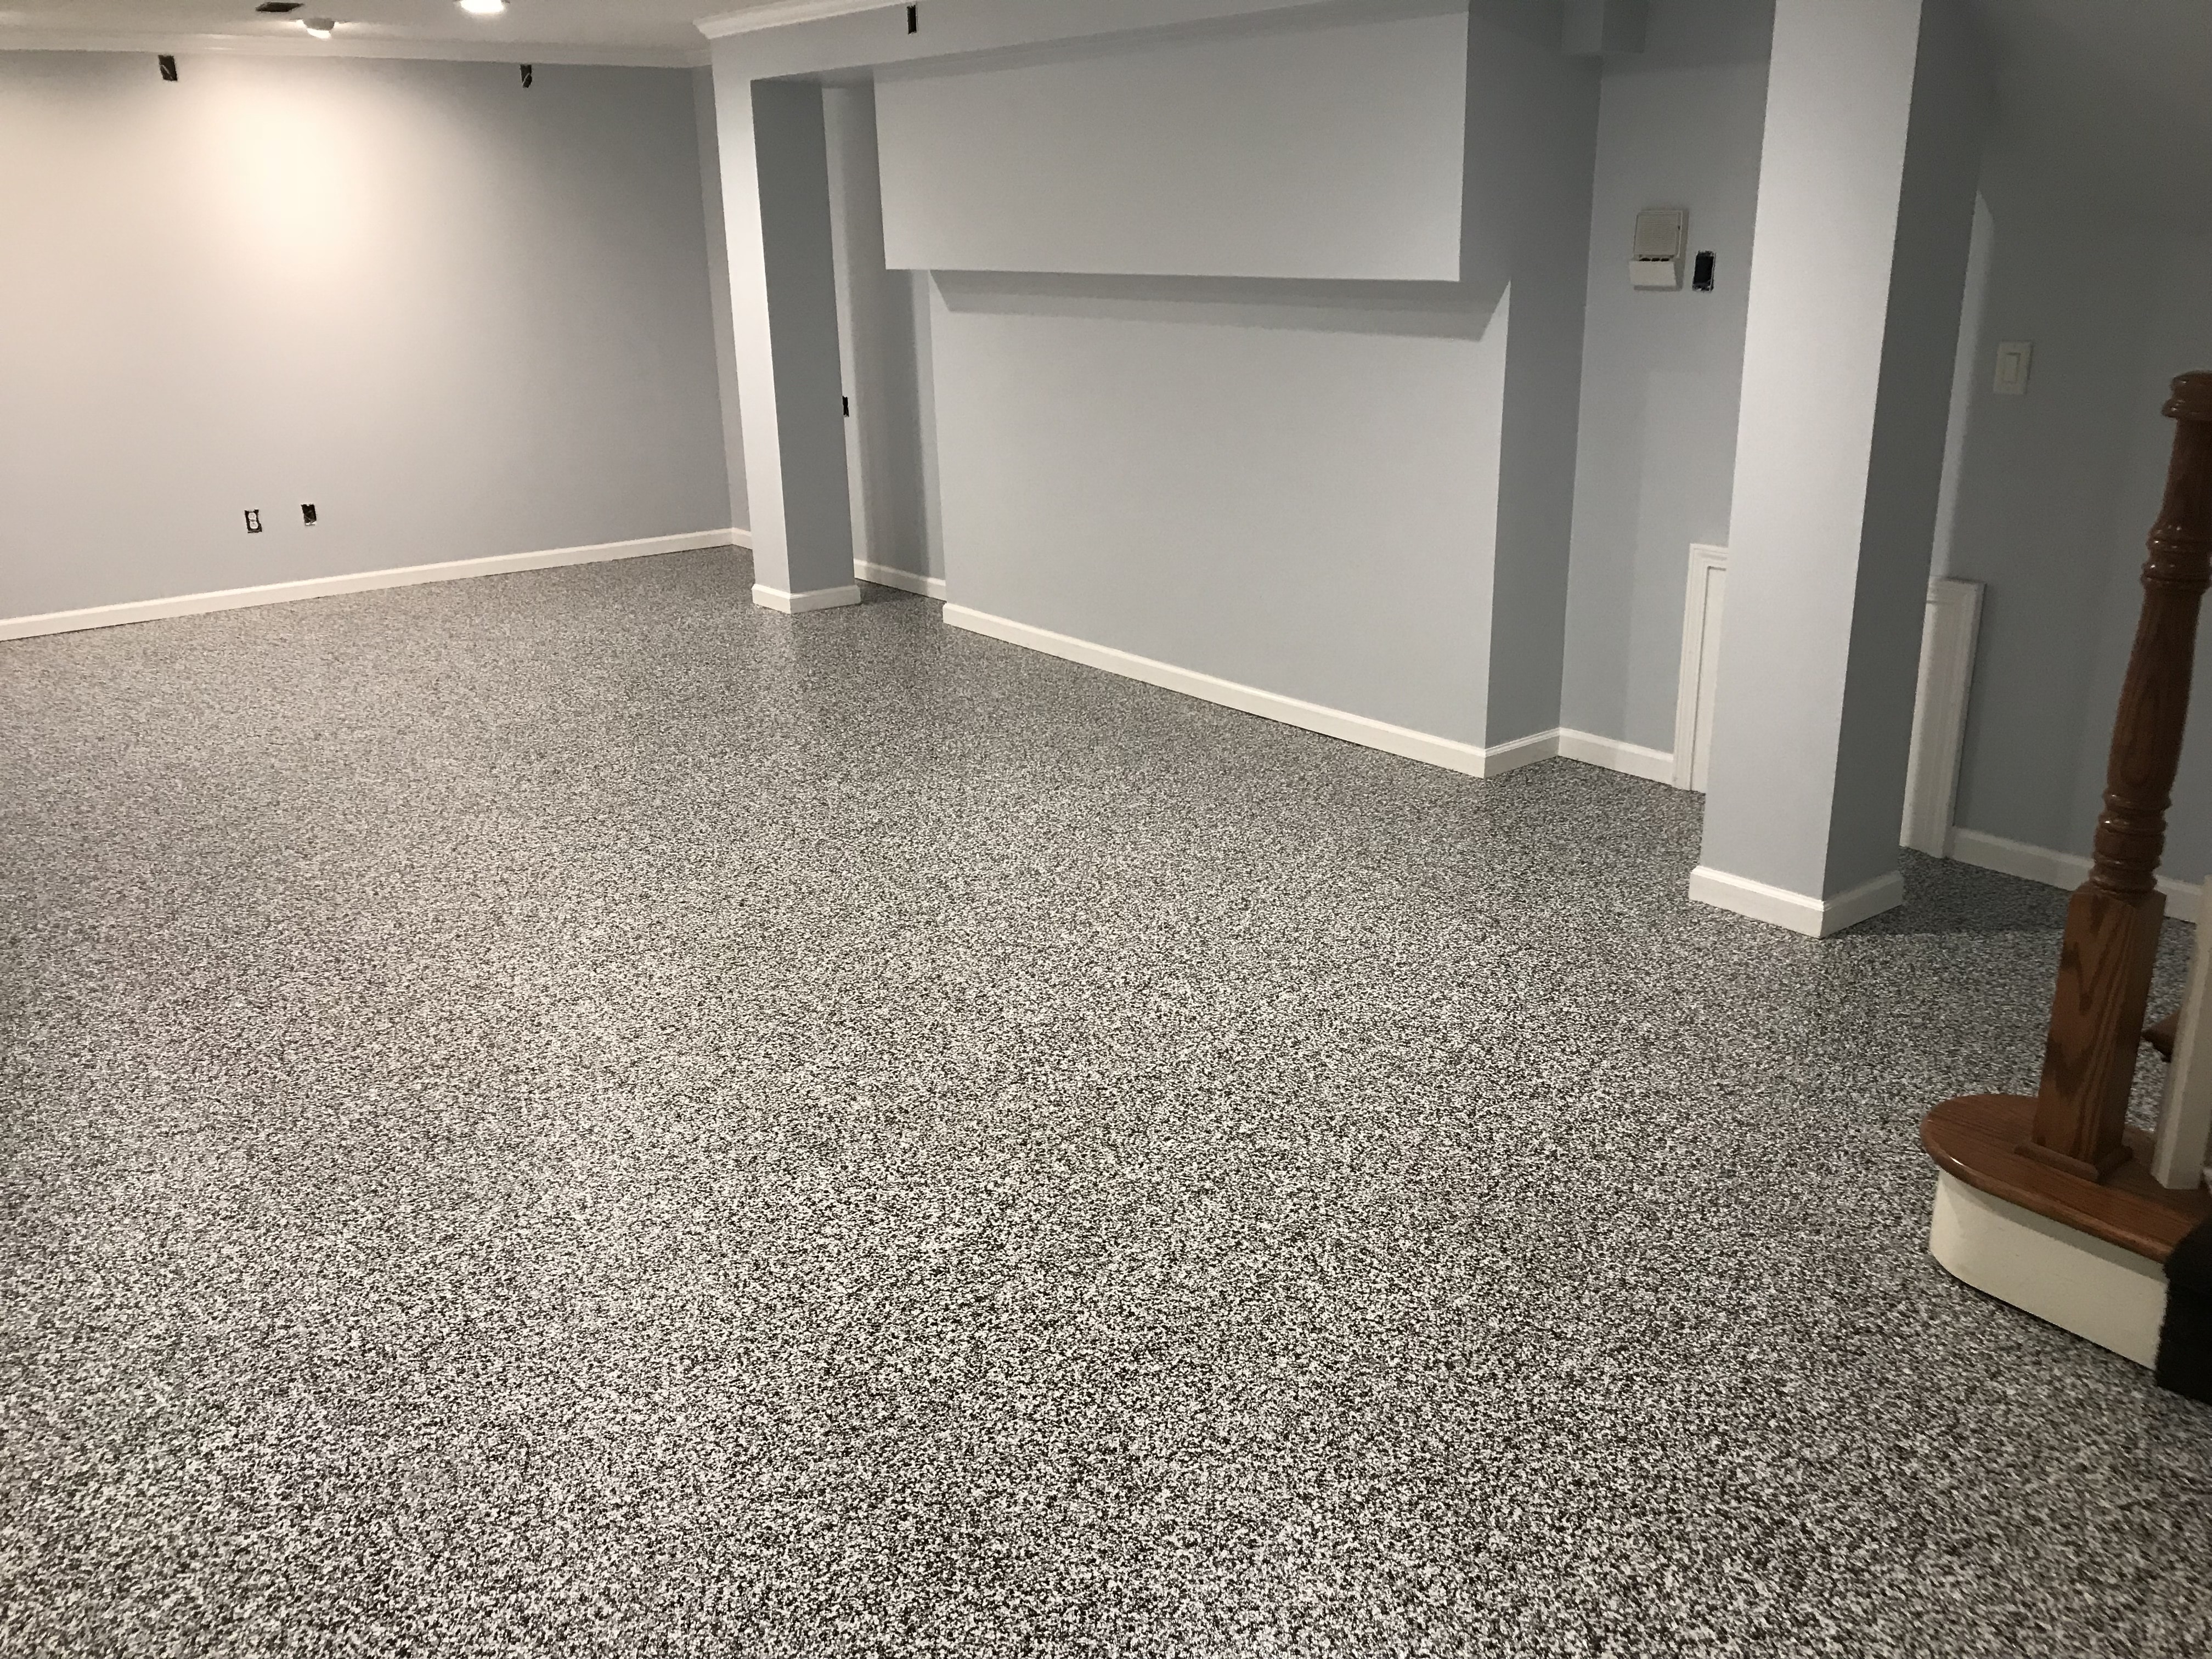 Ditch Your Basement Carpet | Indy Floor Coating | Indianapolis, IN